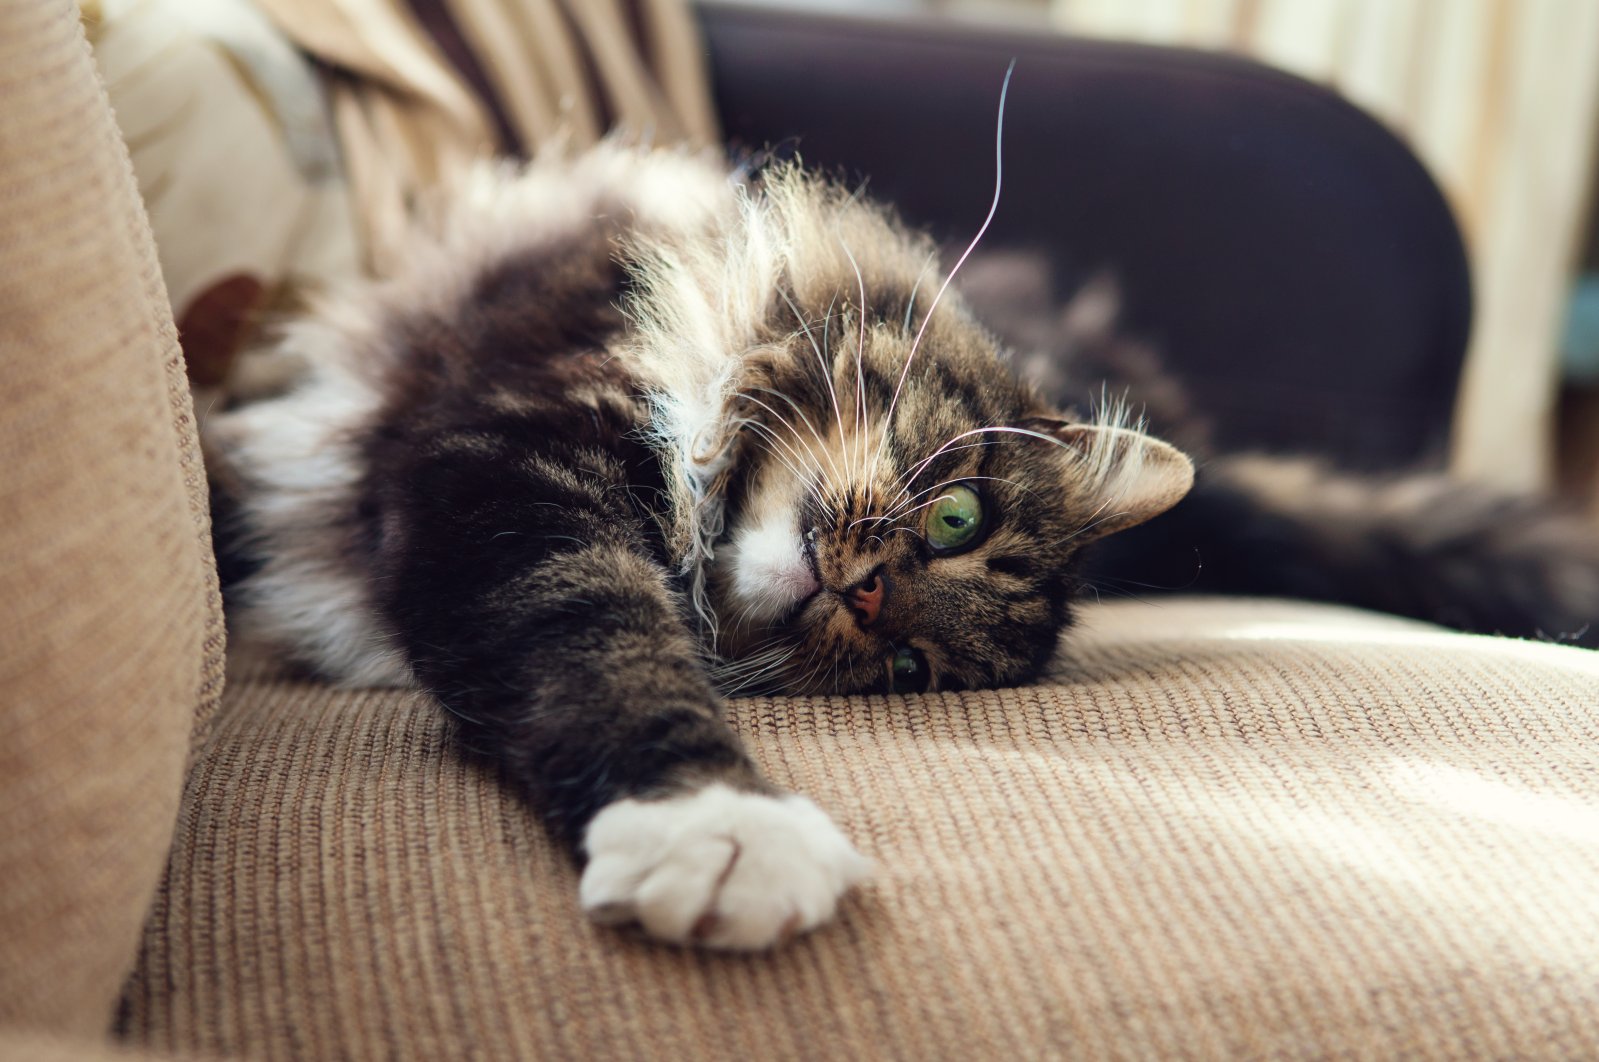 Carpets and sofas are prime spots for cats to sharpen their claws. (Shutterstock Photo)